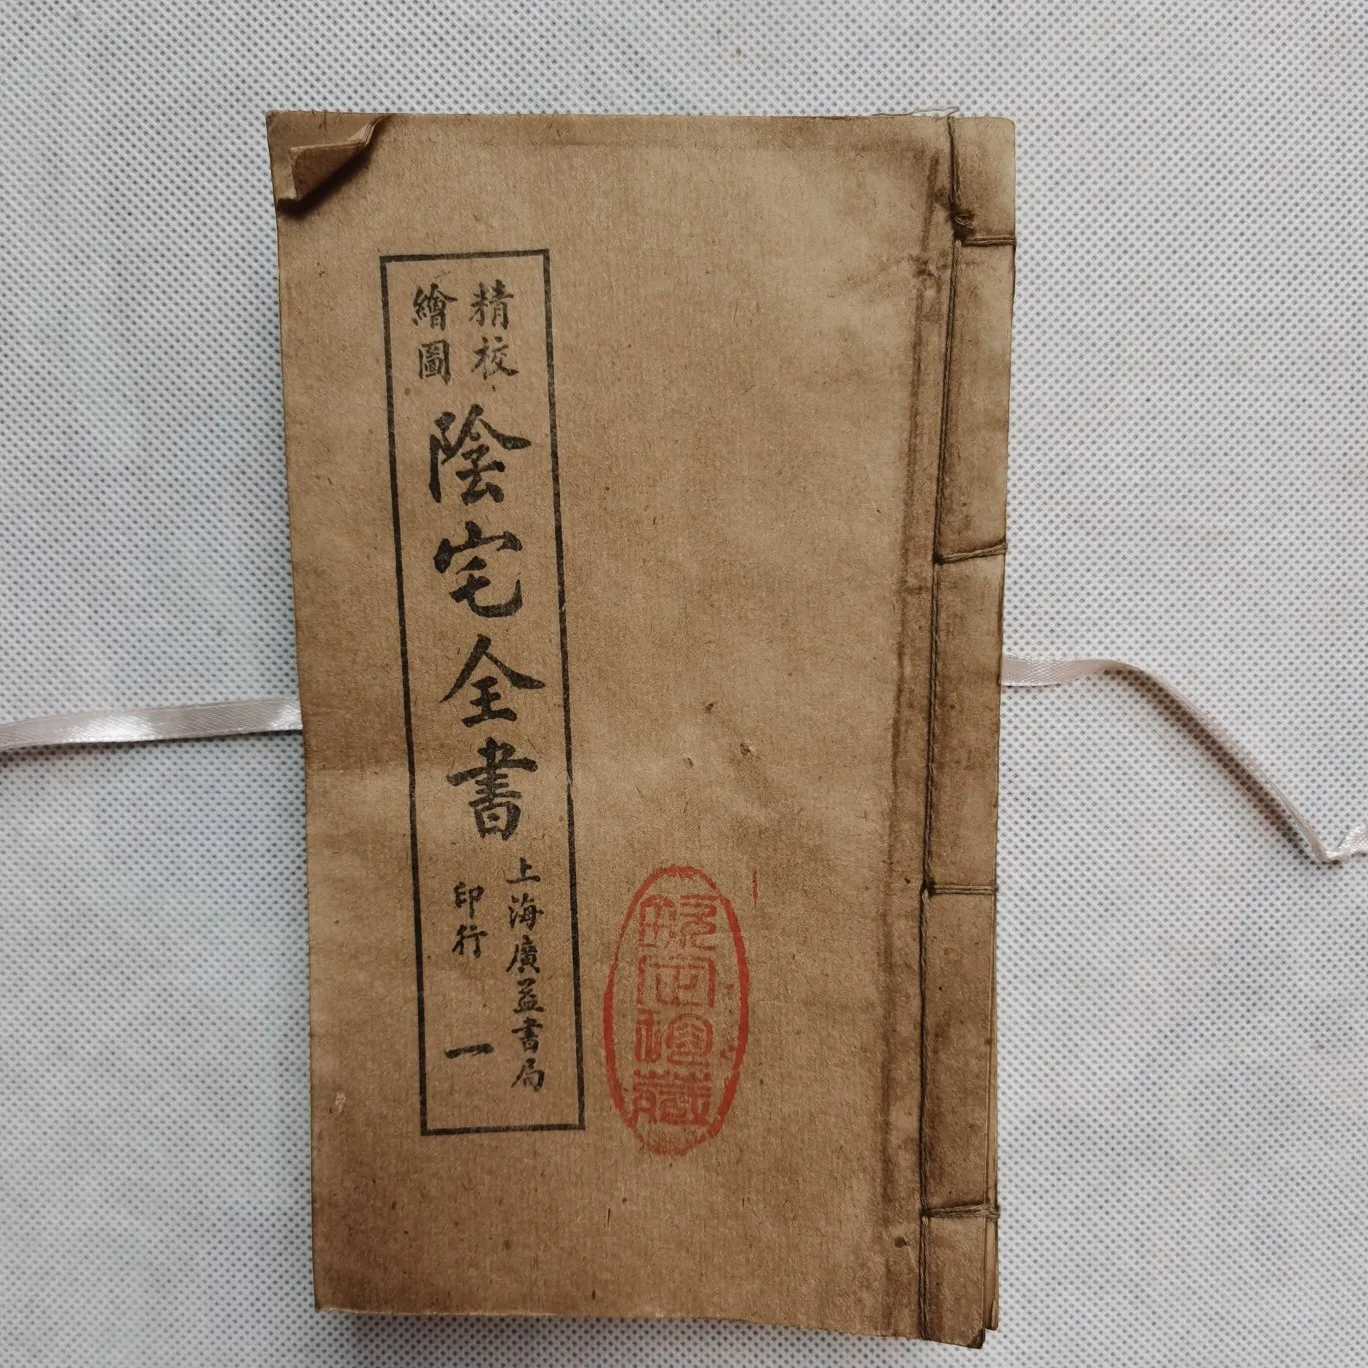 

Yinzhai Quanshu old book retro decoration calligraphy and painting antique thread bound old book